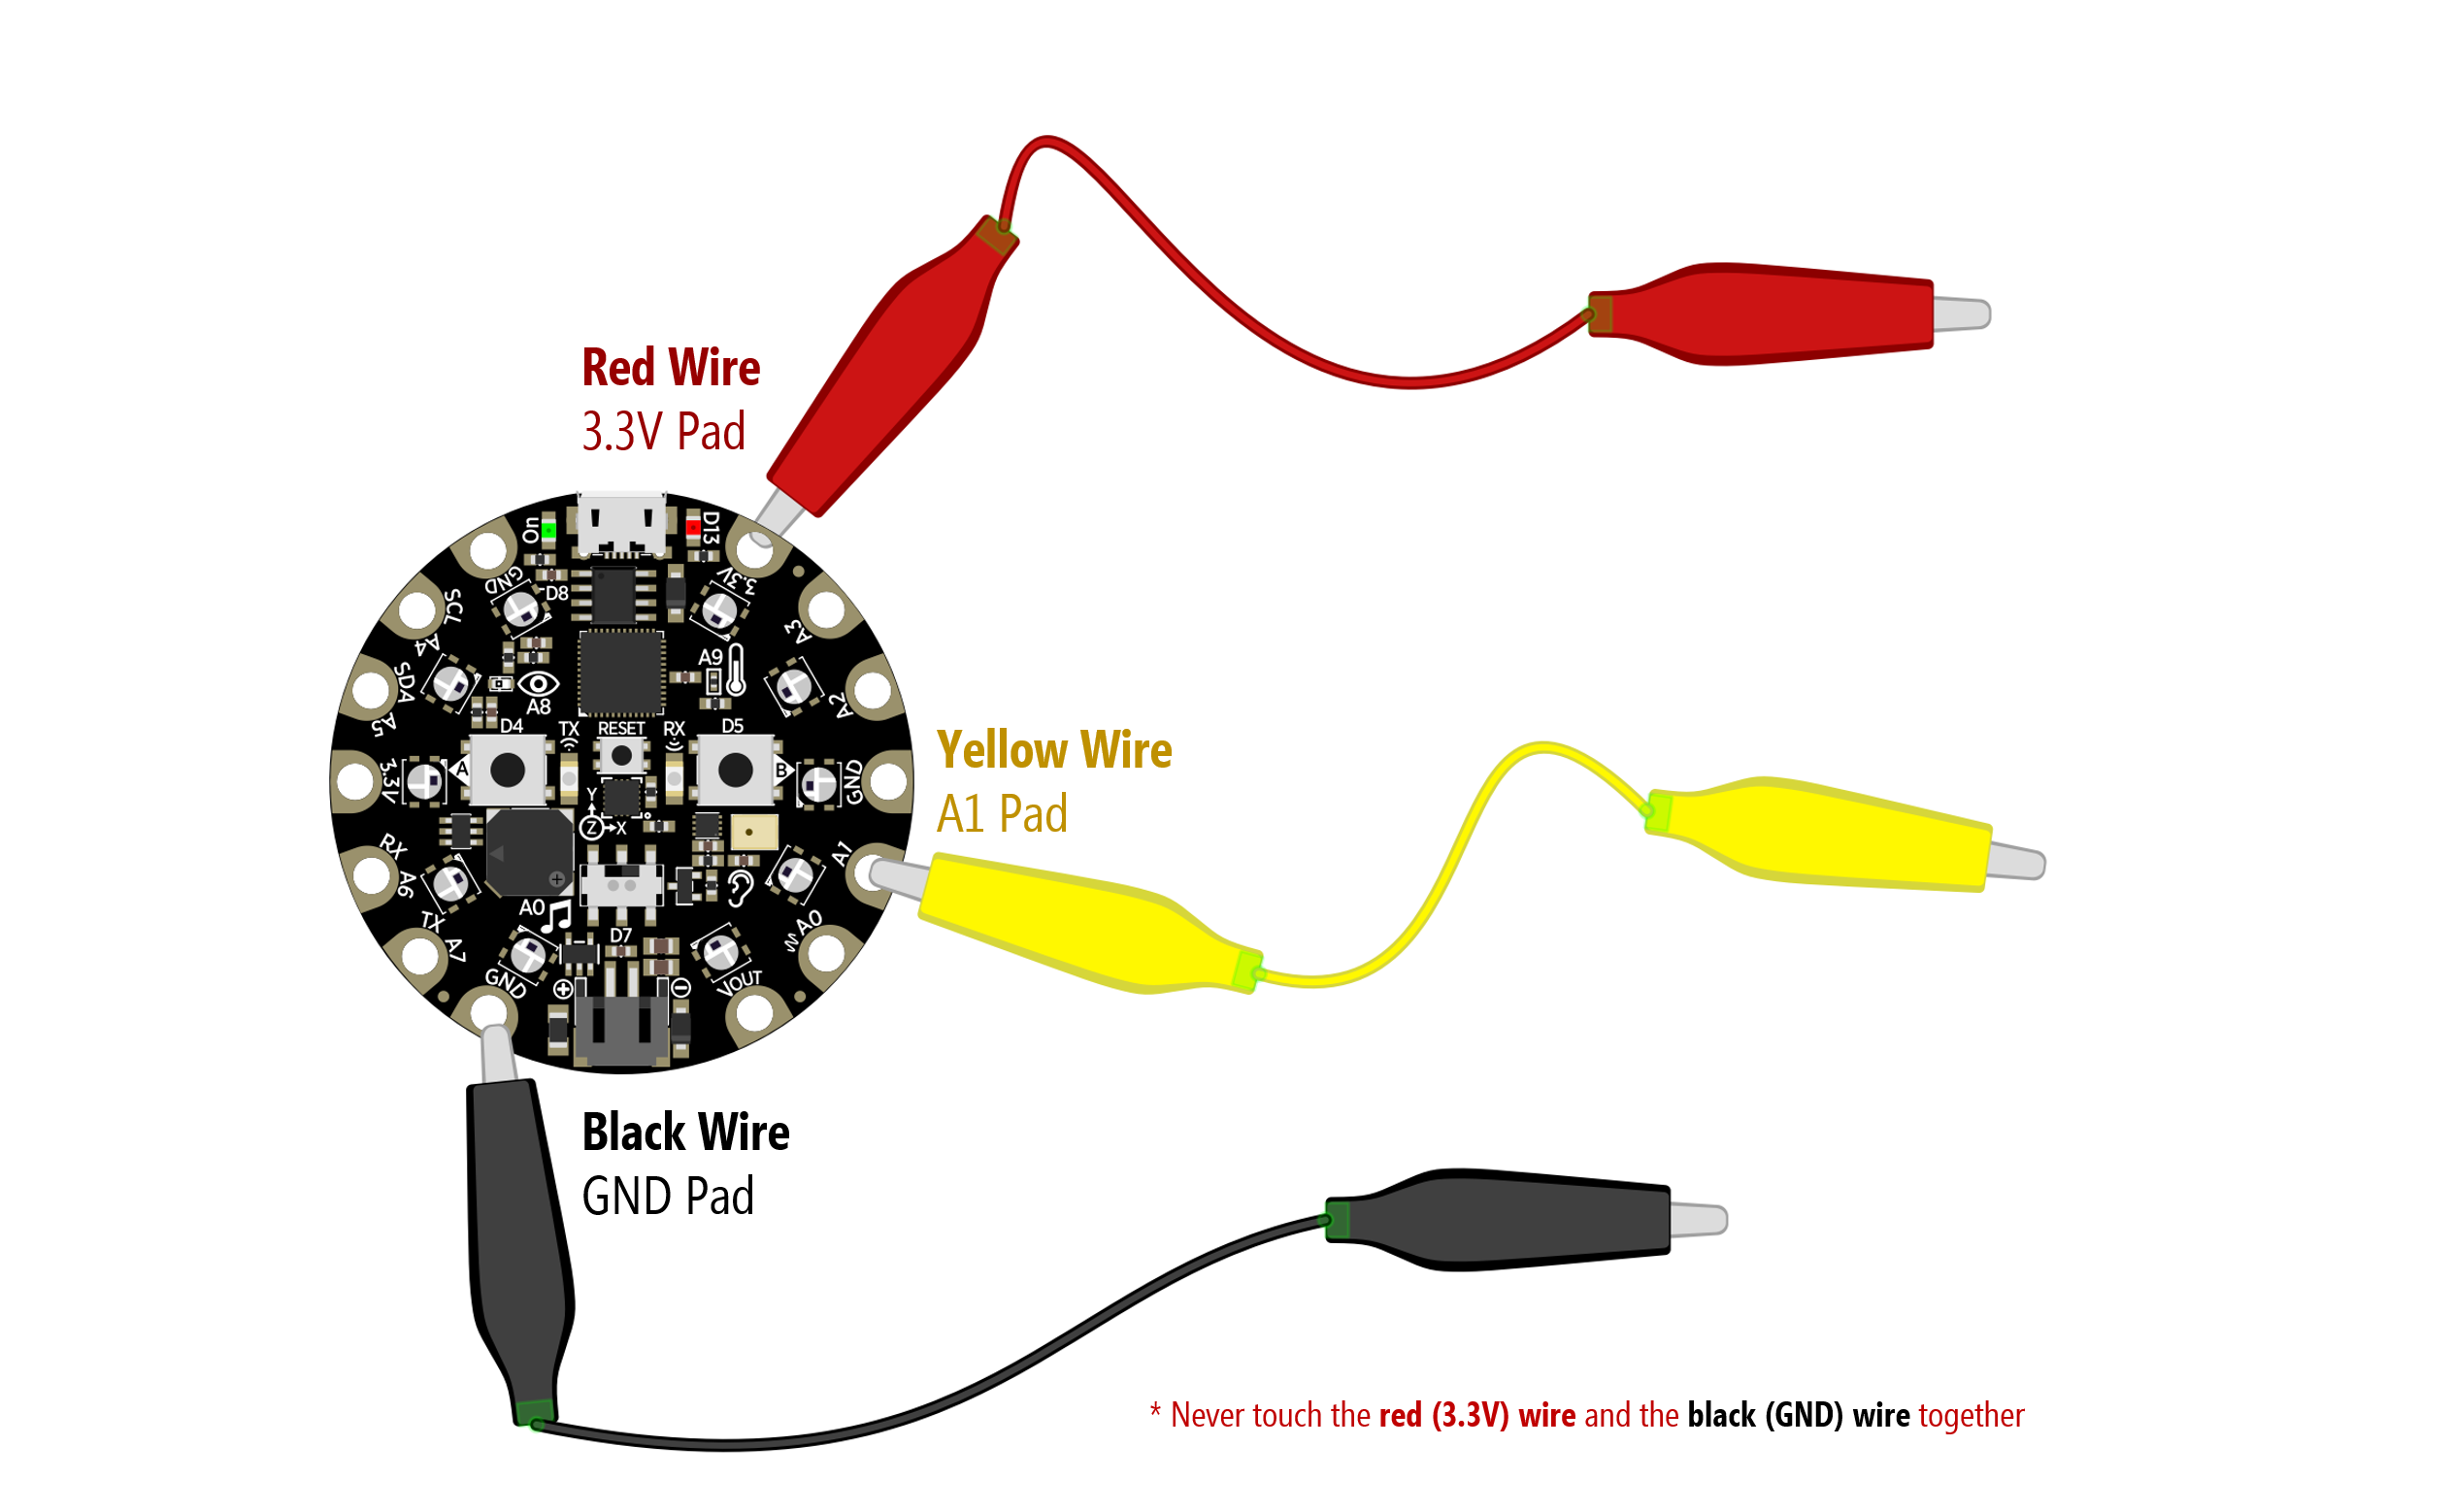 An image of the basic analog input circuit with a red wire connected to 3.3V, a black wire to GND, and a yellow wire to A1